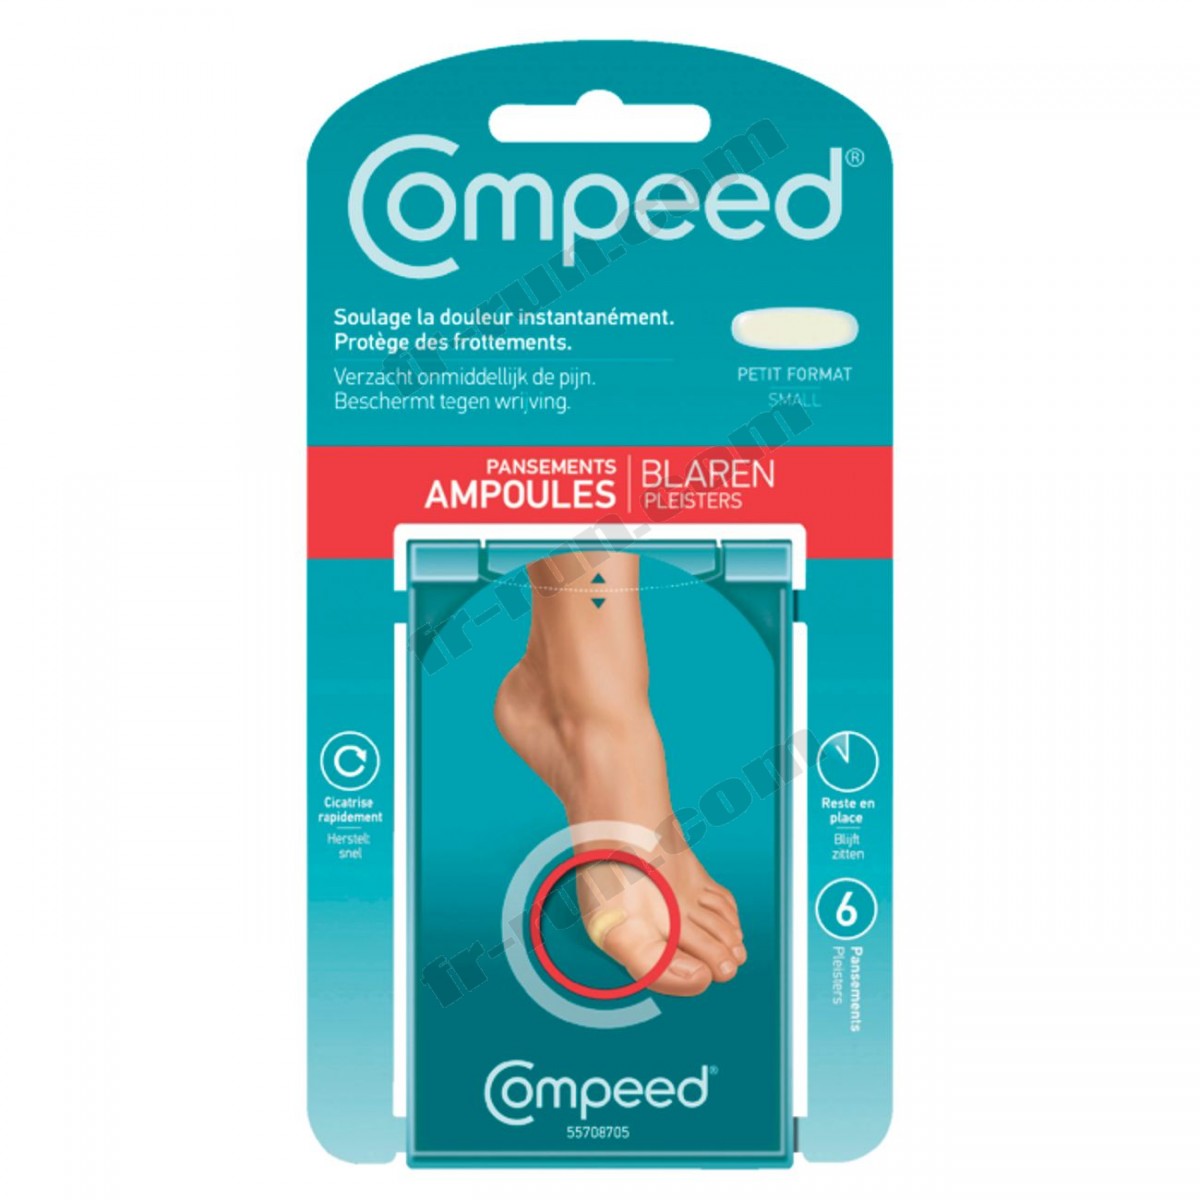 Compeed/PROTECTION COMPEED COMPEED PM X6 ◇◇◇ Pas Cher Du Tout - Compeed/PROTECTION COMPEED COMPEED PM X6 ◇◇◇ Pas Cher Du Tout